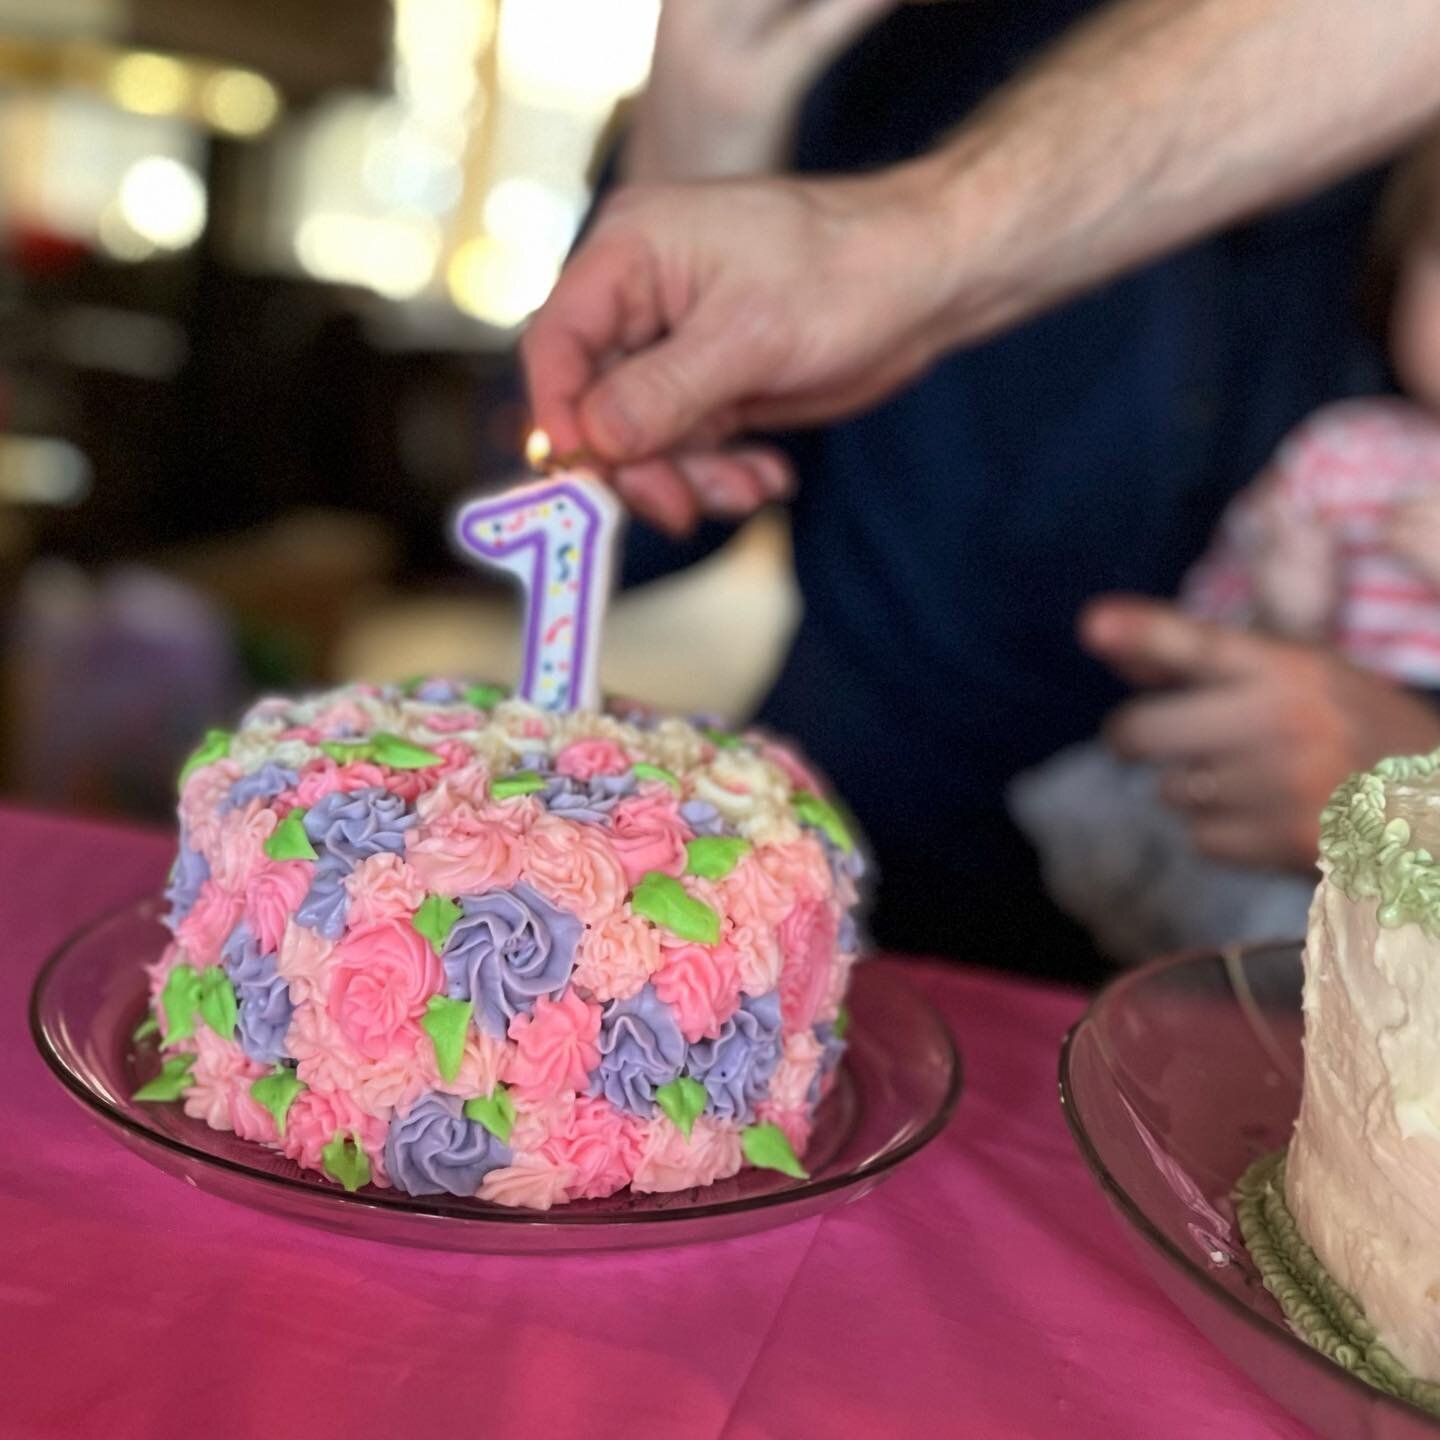 SMASHING AND SOFTENING 🌸

I decorated a fancy smash cake for my granddaughter&rsquo;s birthday and she engaged in some brilliant smashing. It was wonderful! And got me thinking&hellip;

About how I never made a smash cake for her dad (because wouldn